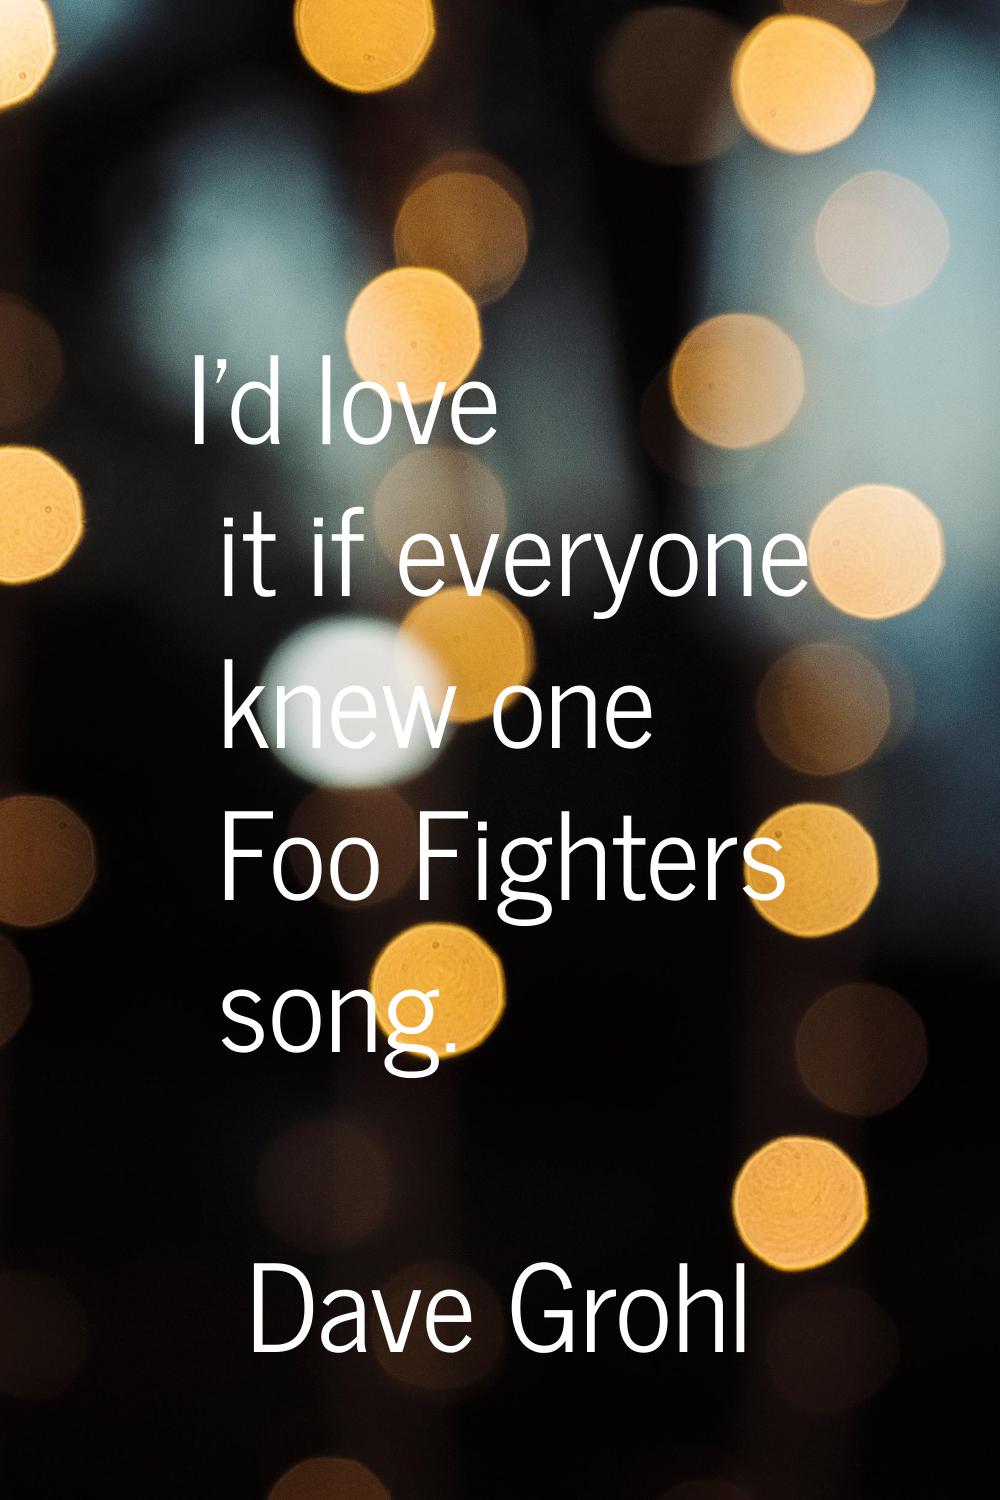 I'd love it if everyone knew one Foo Fighters song.